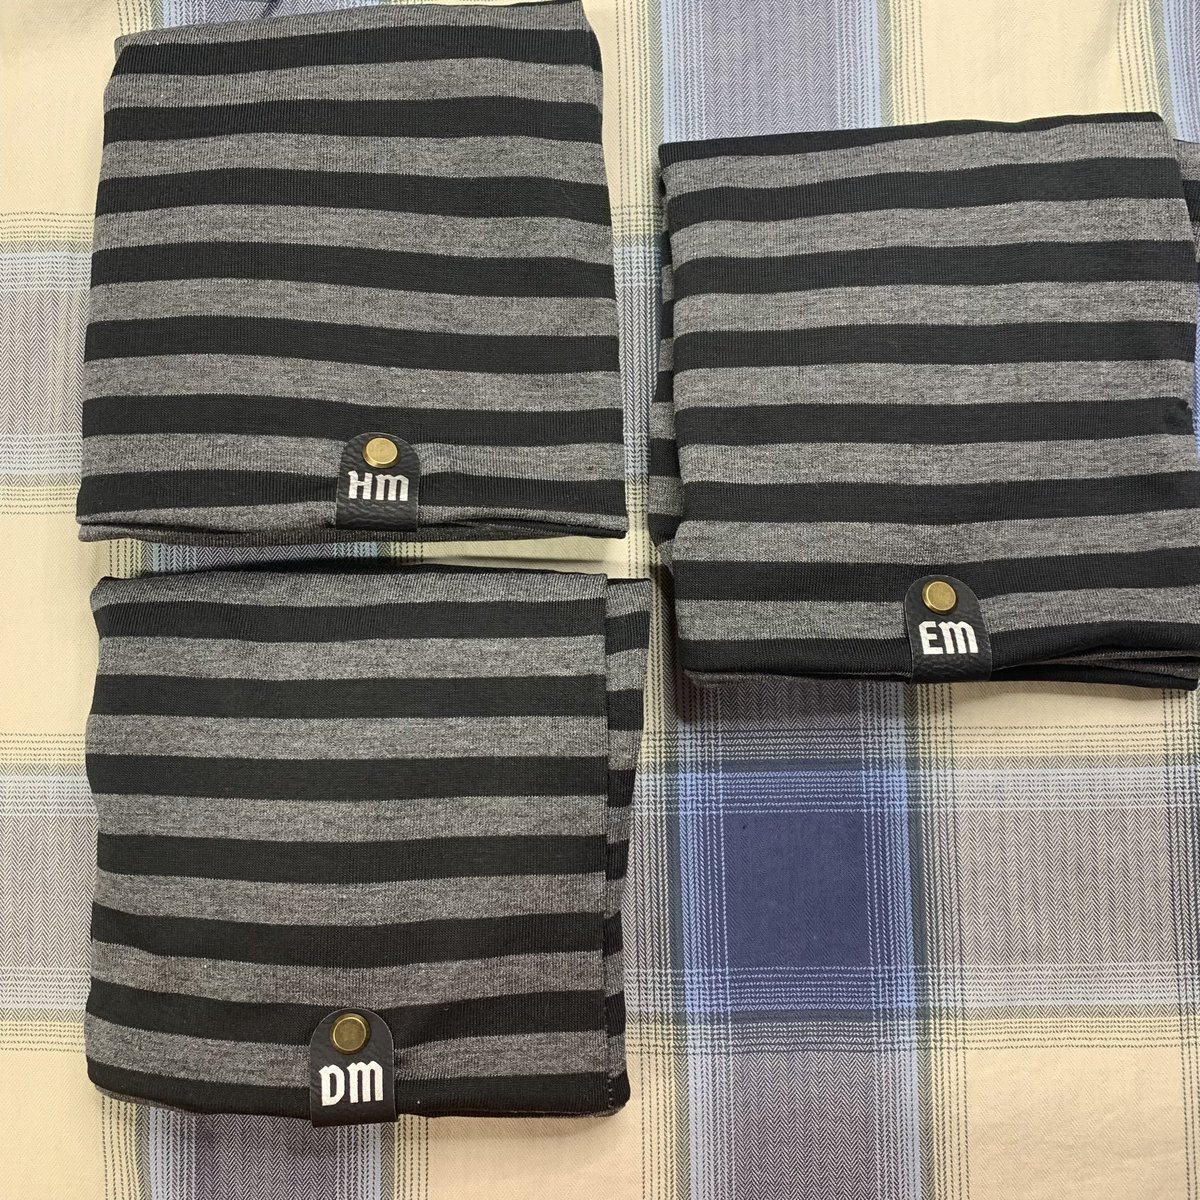 #NEW #etsyshop #personlised #Slouchy #beanie #Initials #Beaniehat #Striped #hat #Black #Grey #Matching #clothing #Jersey #Matchinghats etsy.me/4anXBYt #slouchyhats #beaniehats #stripehats #chemohats #snood #slouchybeanie #handmadehats #unisexhats #stretchyhats